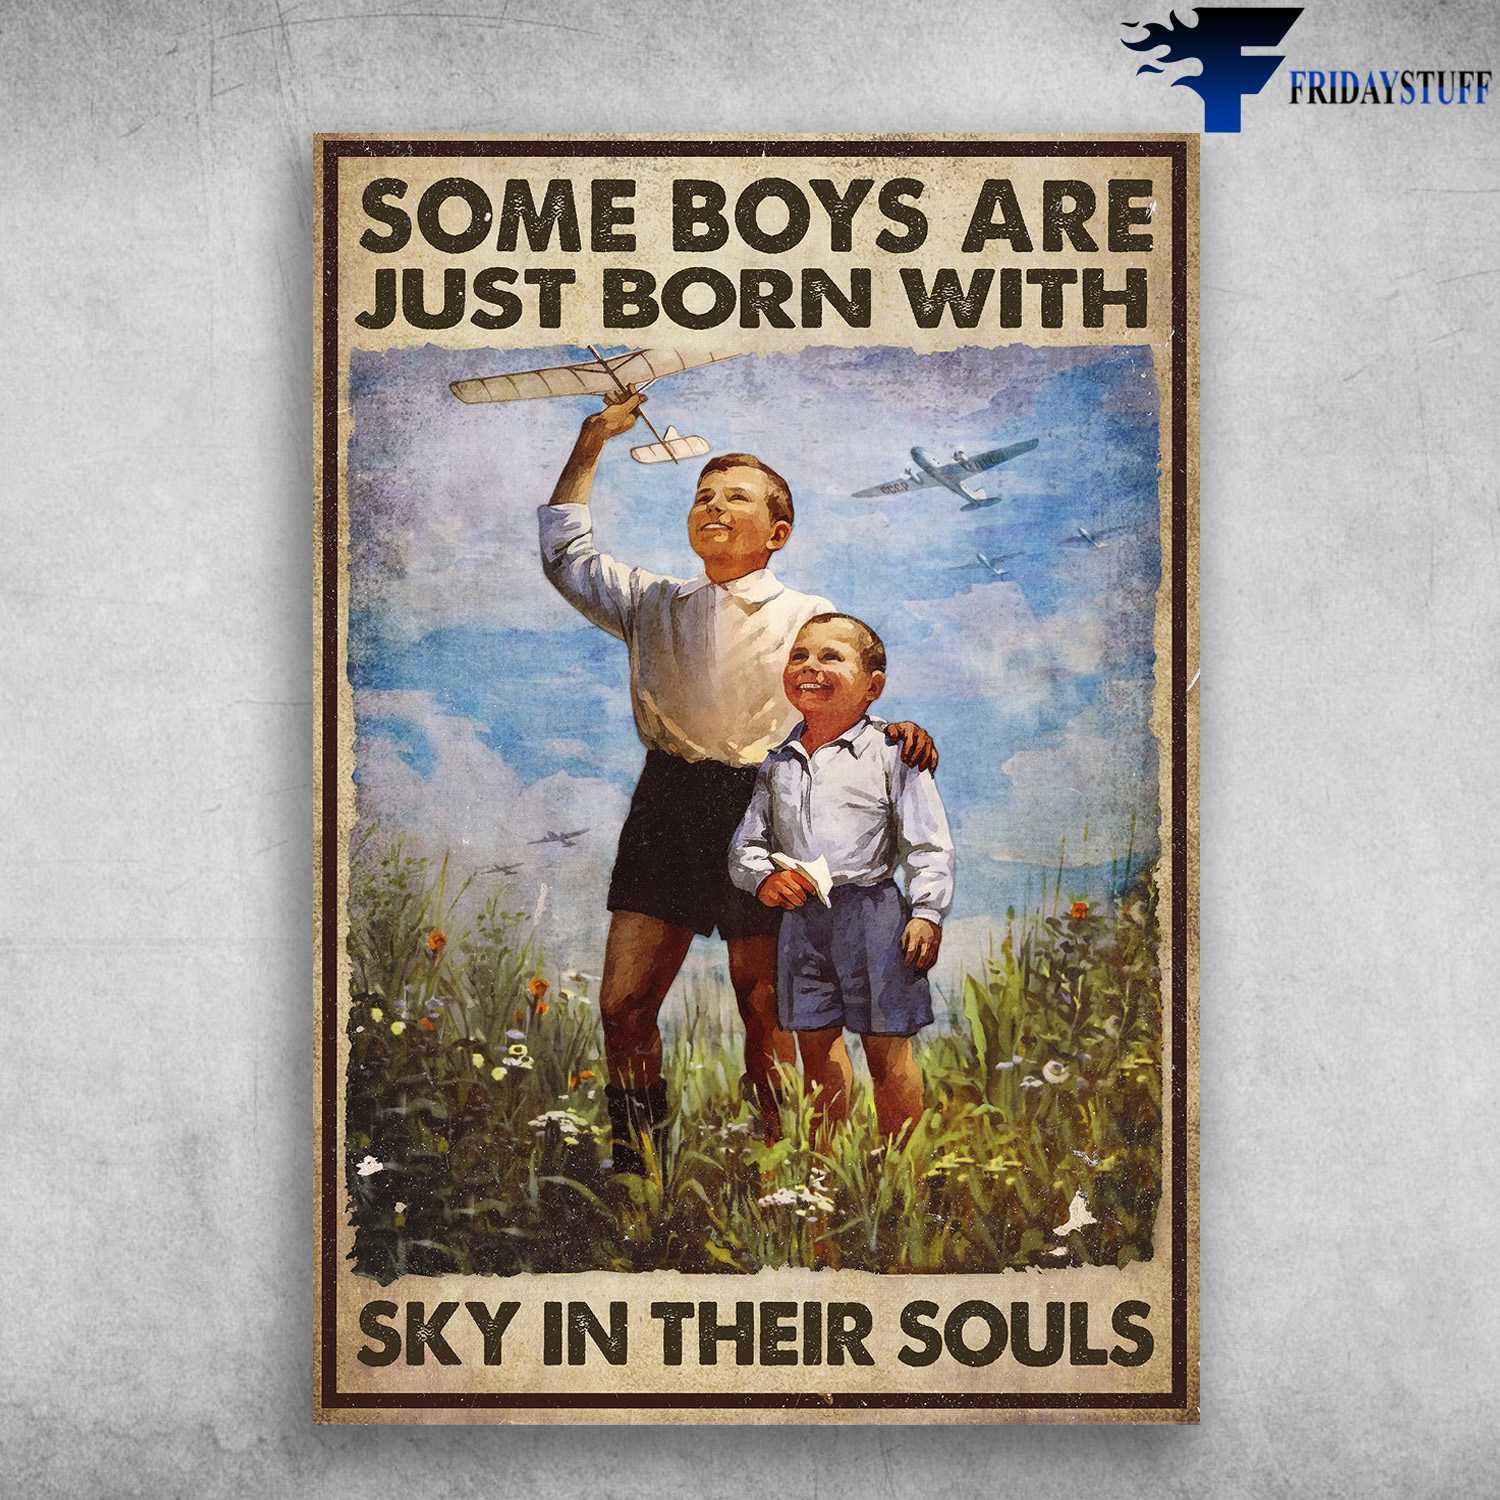 Boys Love Airplane - Some Boys Are Just Born With, Sky In Their Souls